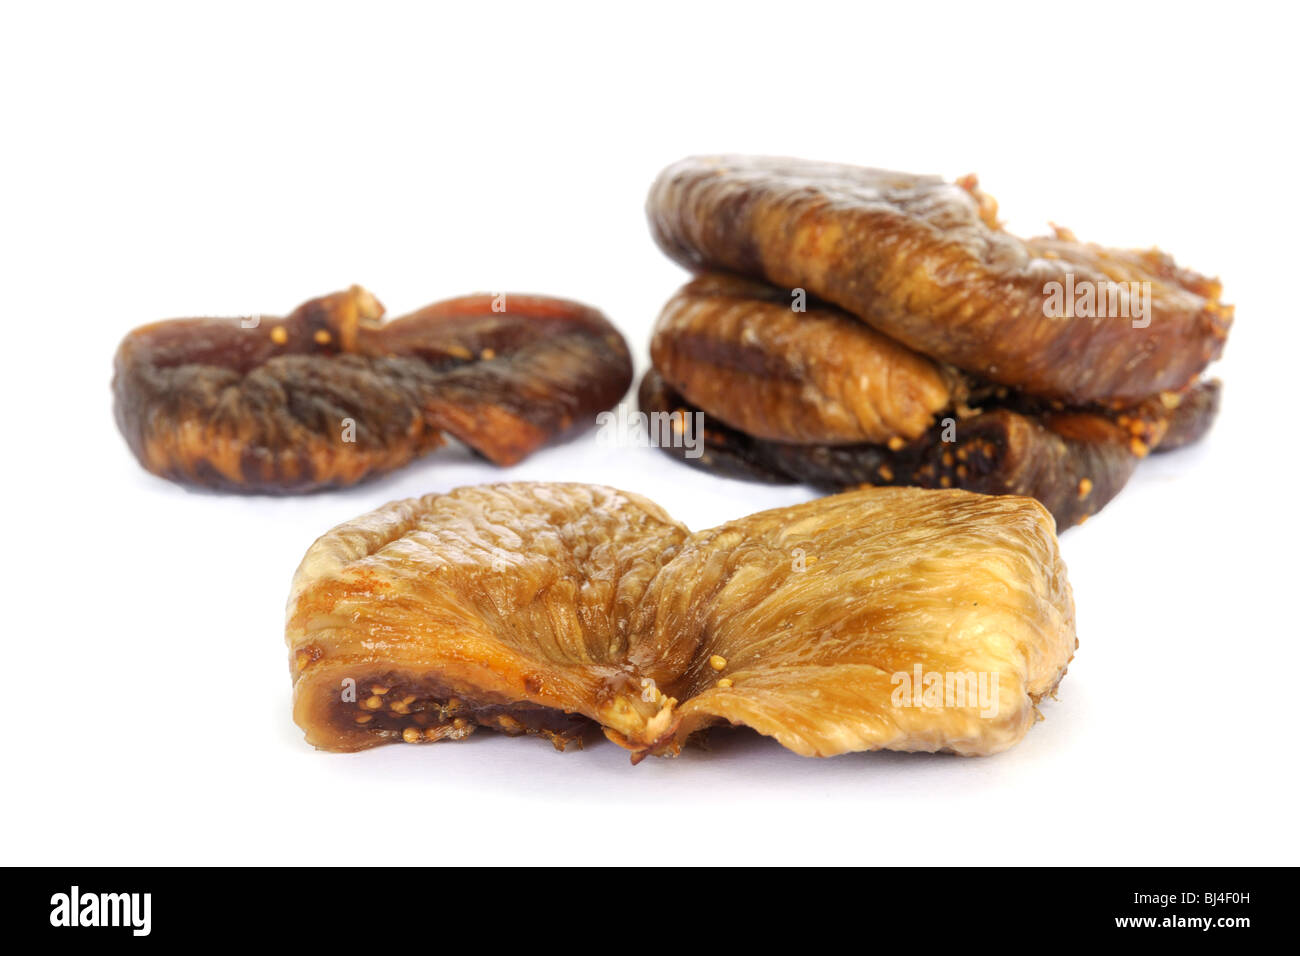 Dried figs, Common fig (Ficus carica) Stock Photo